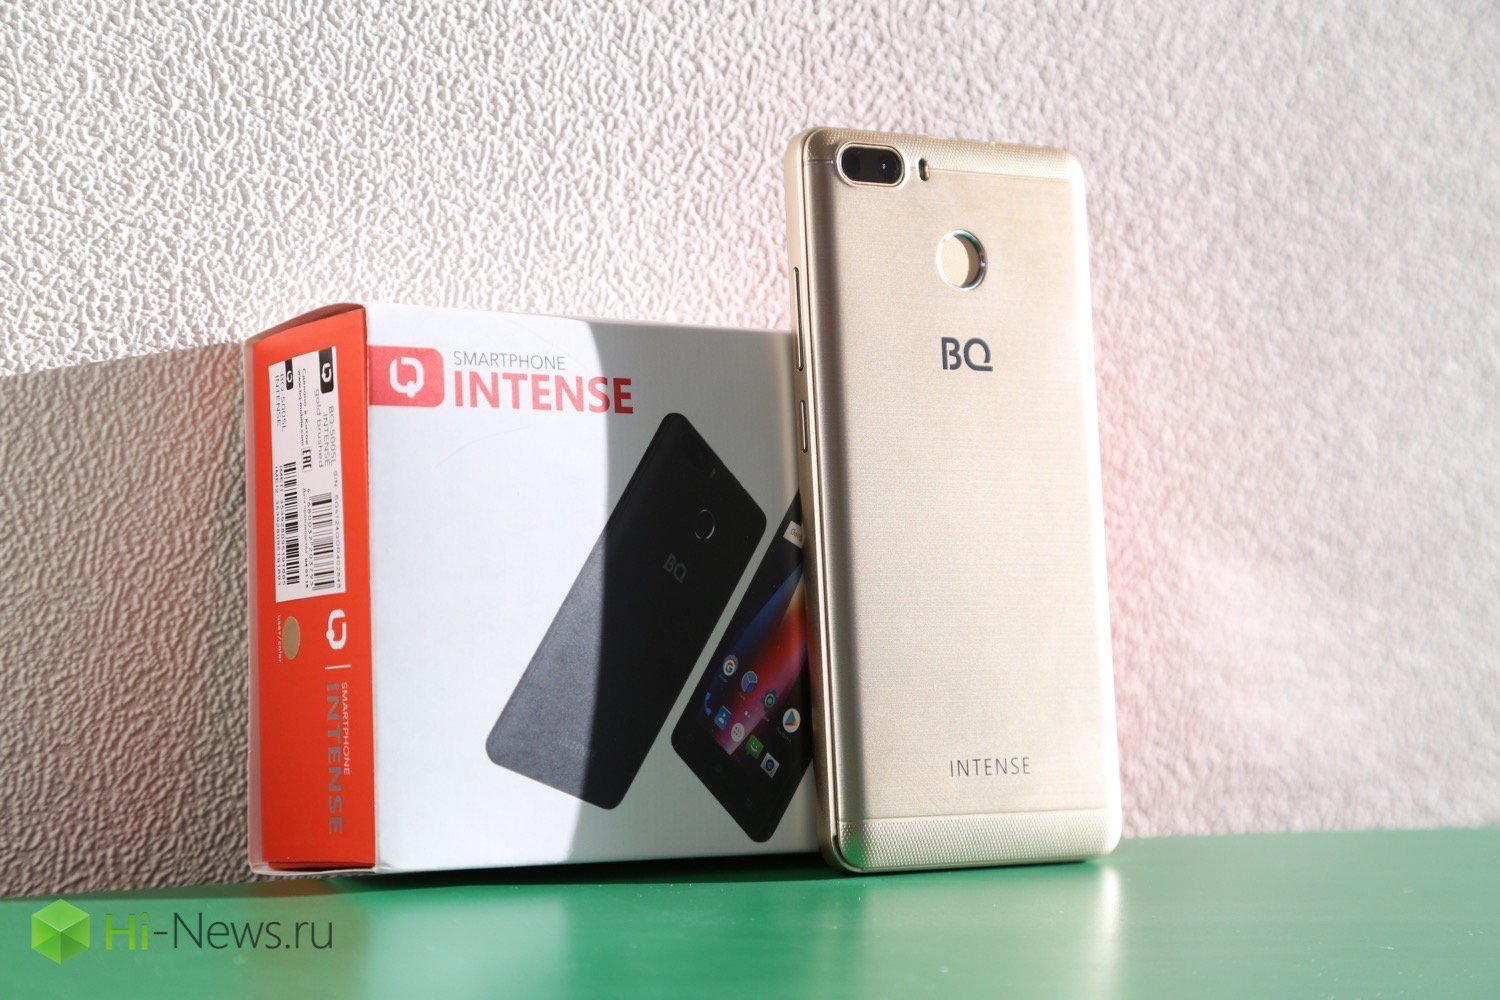 BQ Intense — long-lasting smartphone from Russia